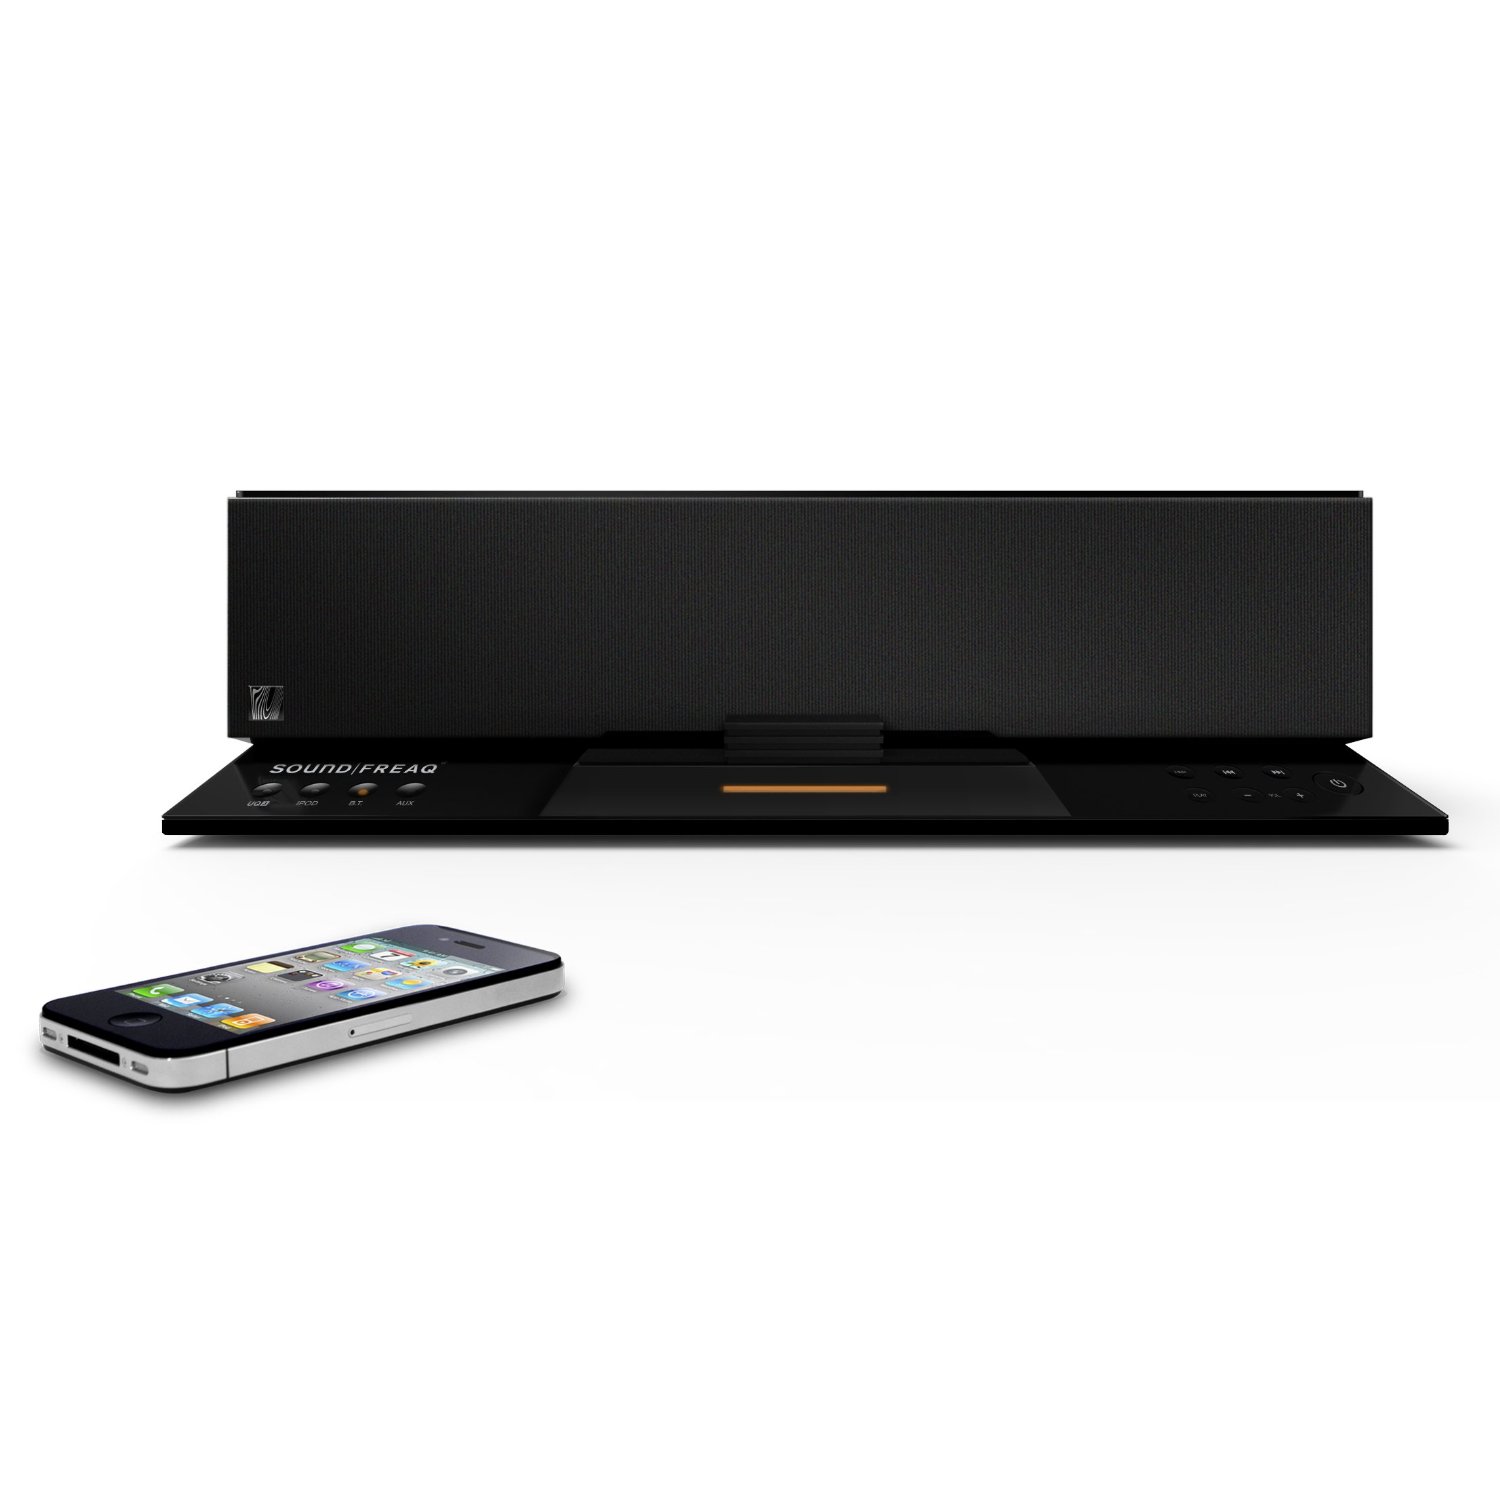 http://thetechjournal.com/wp-content/uploads/images/1107/1310022586-soundfreaq-sfq02-sound-step-bluetooth-wireless-audio-system-3.jpg